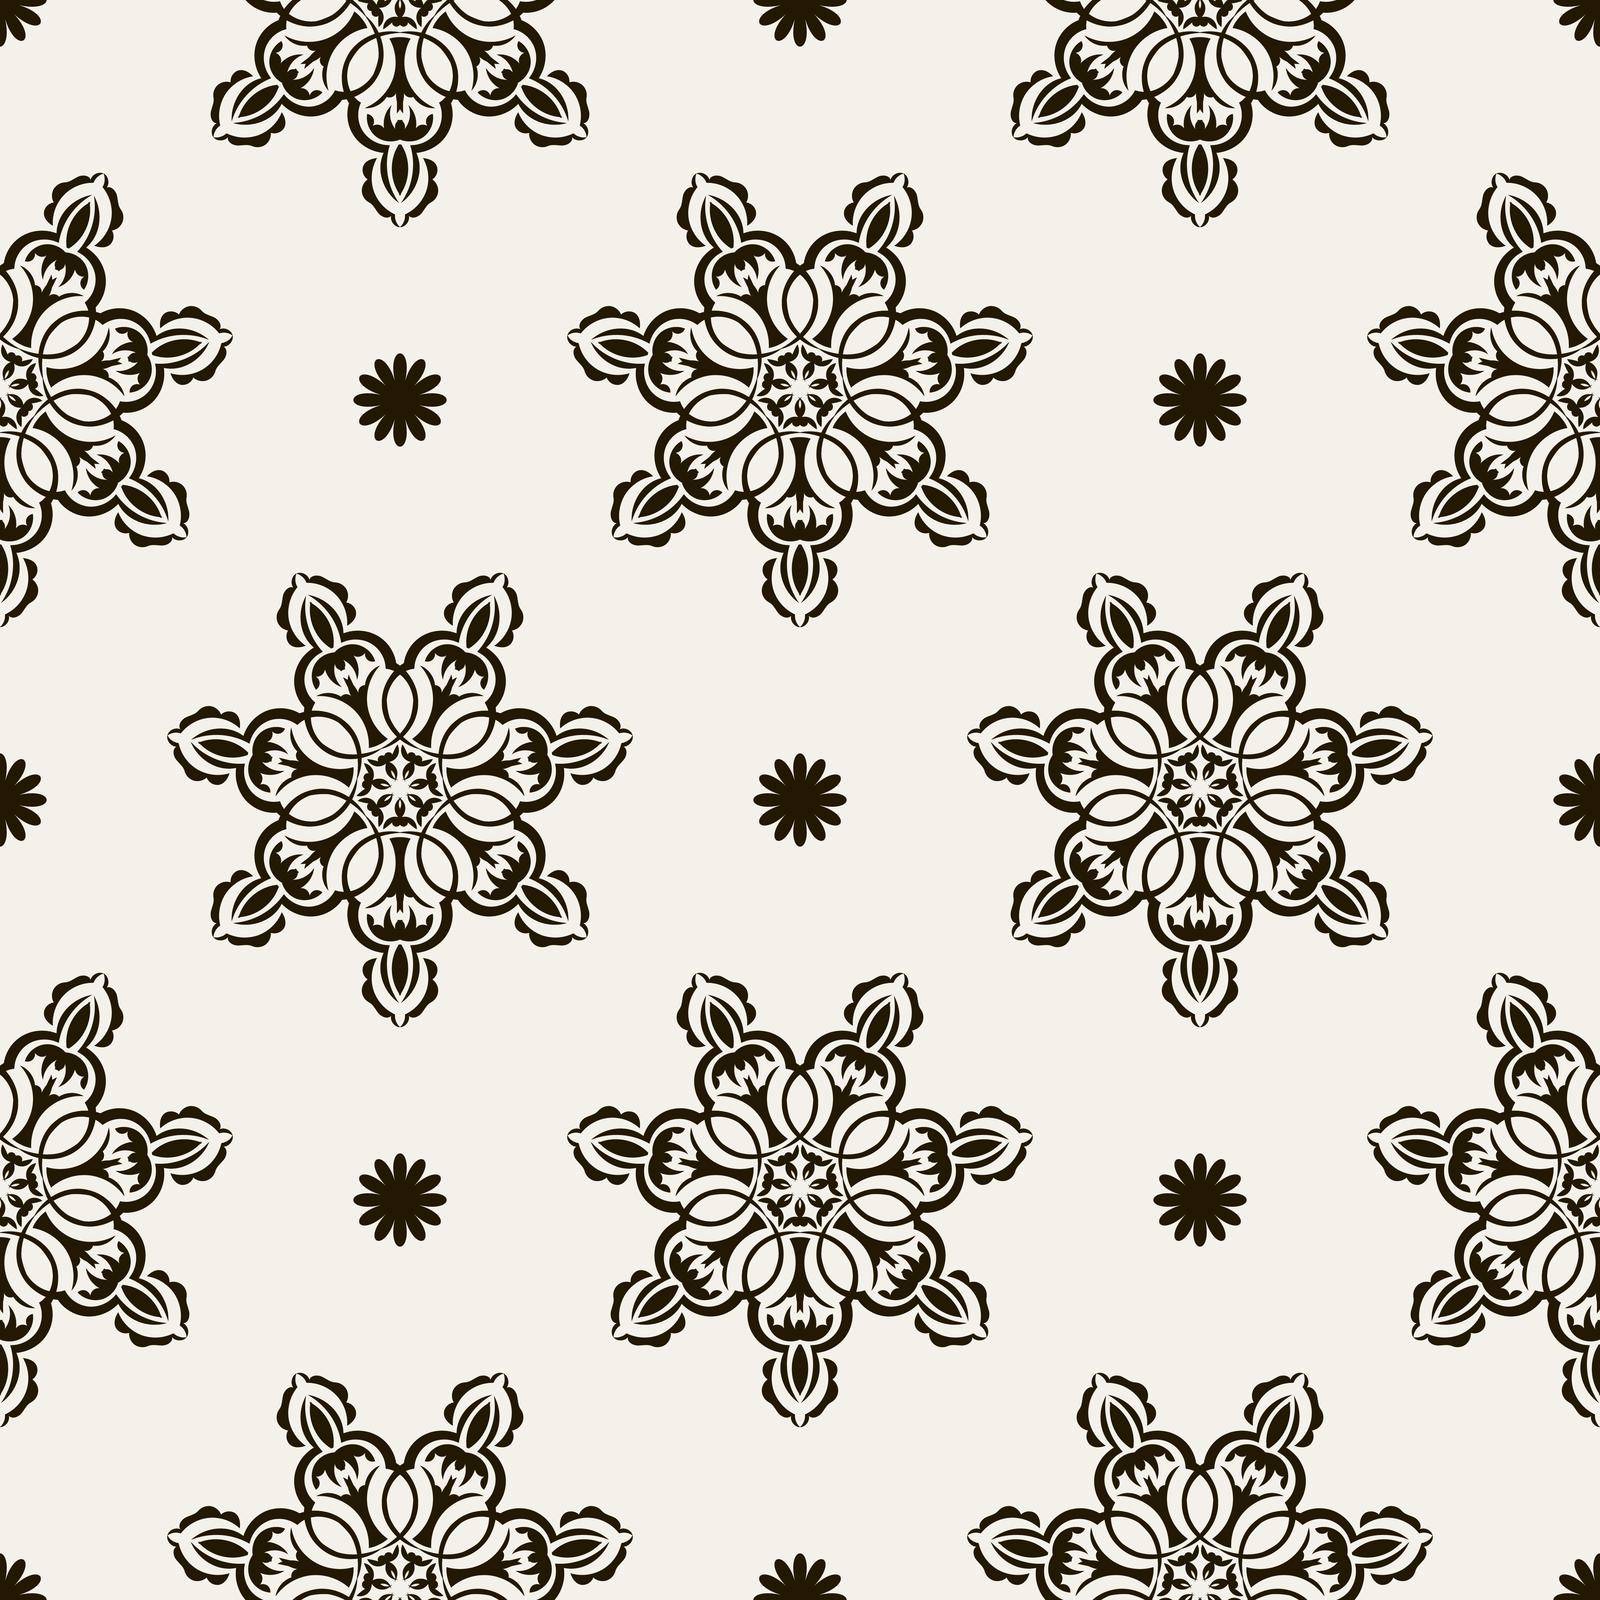 Retro seamless pattern with ornament. Good for clothing, textiles, backgrounds and prints. Vector illustration.